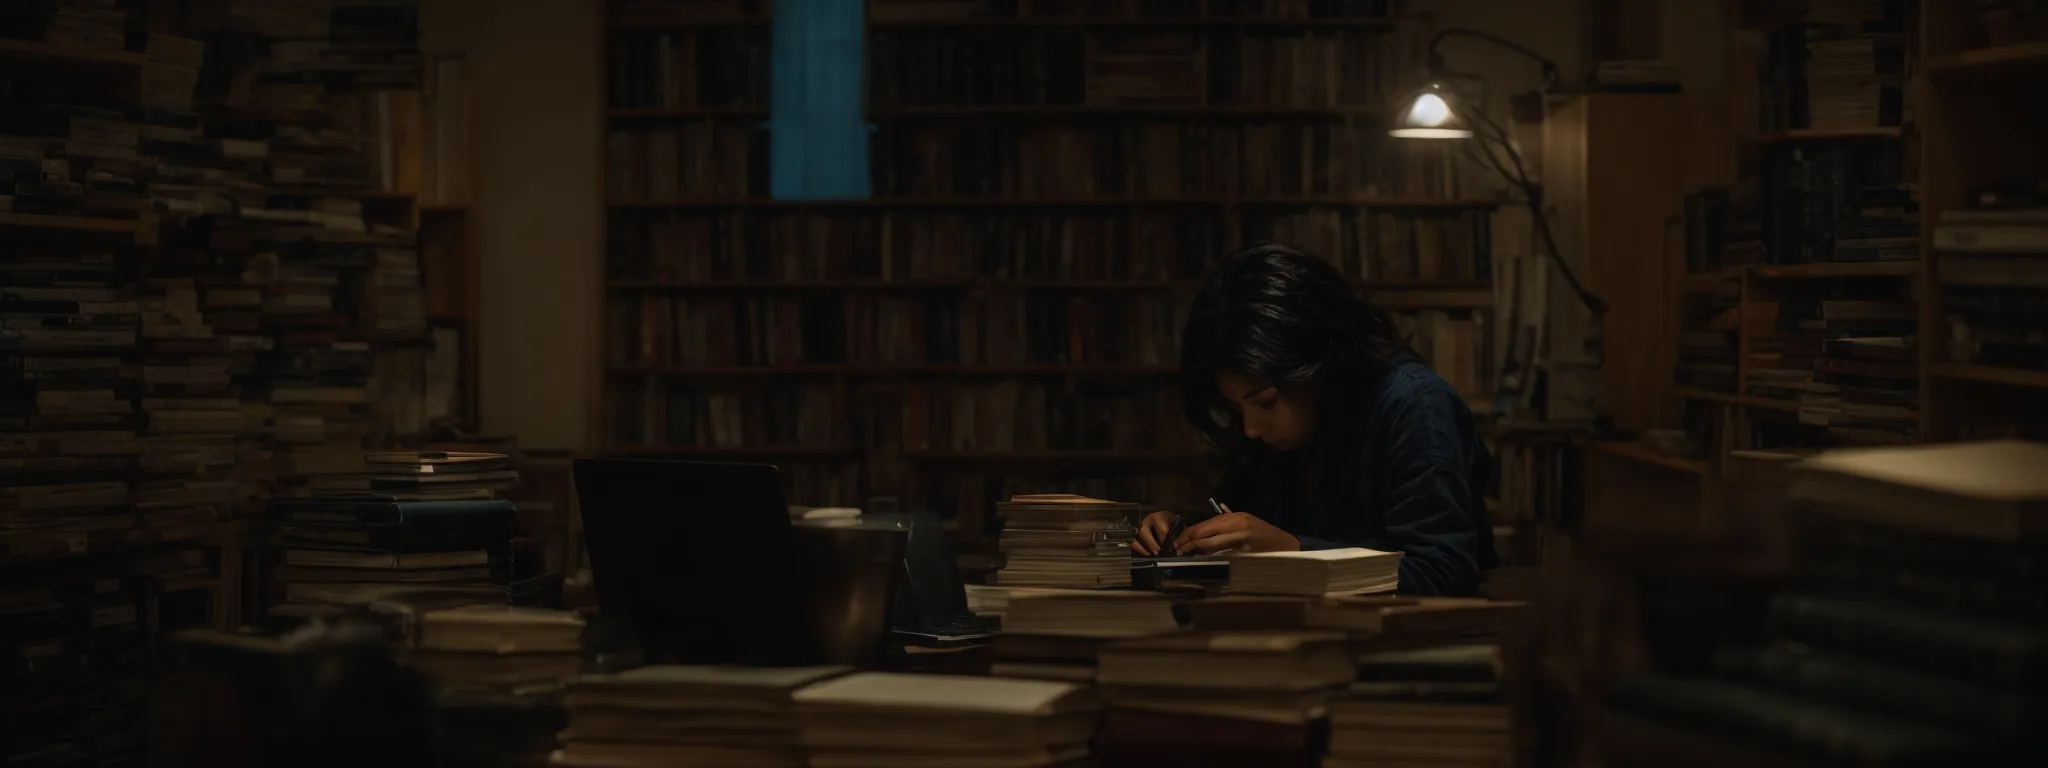 a focused individual leans over a laptop, surrounded by stacks of books, intently typing away in a quiet room bathed in soft light.